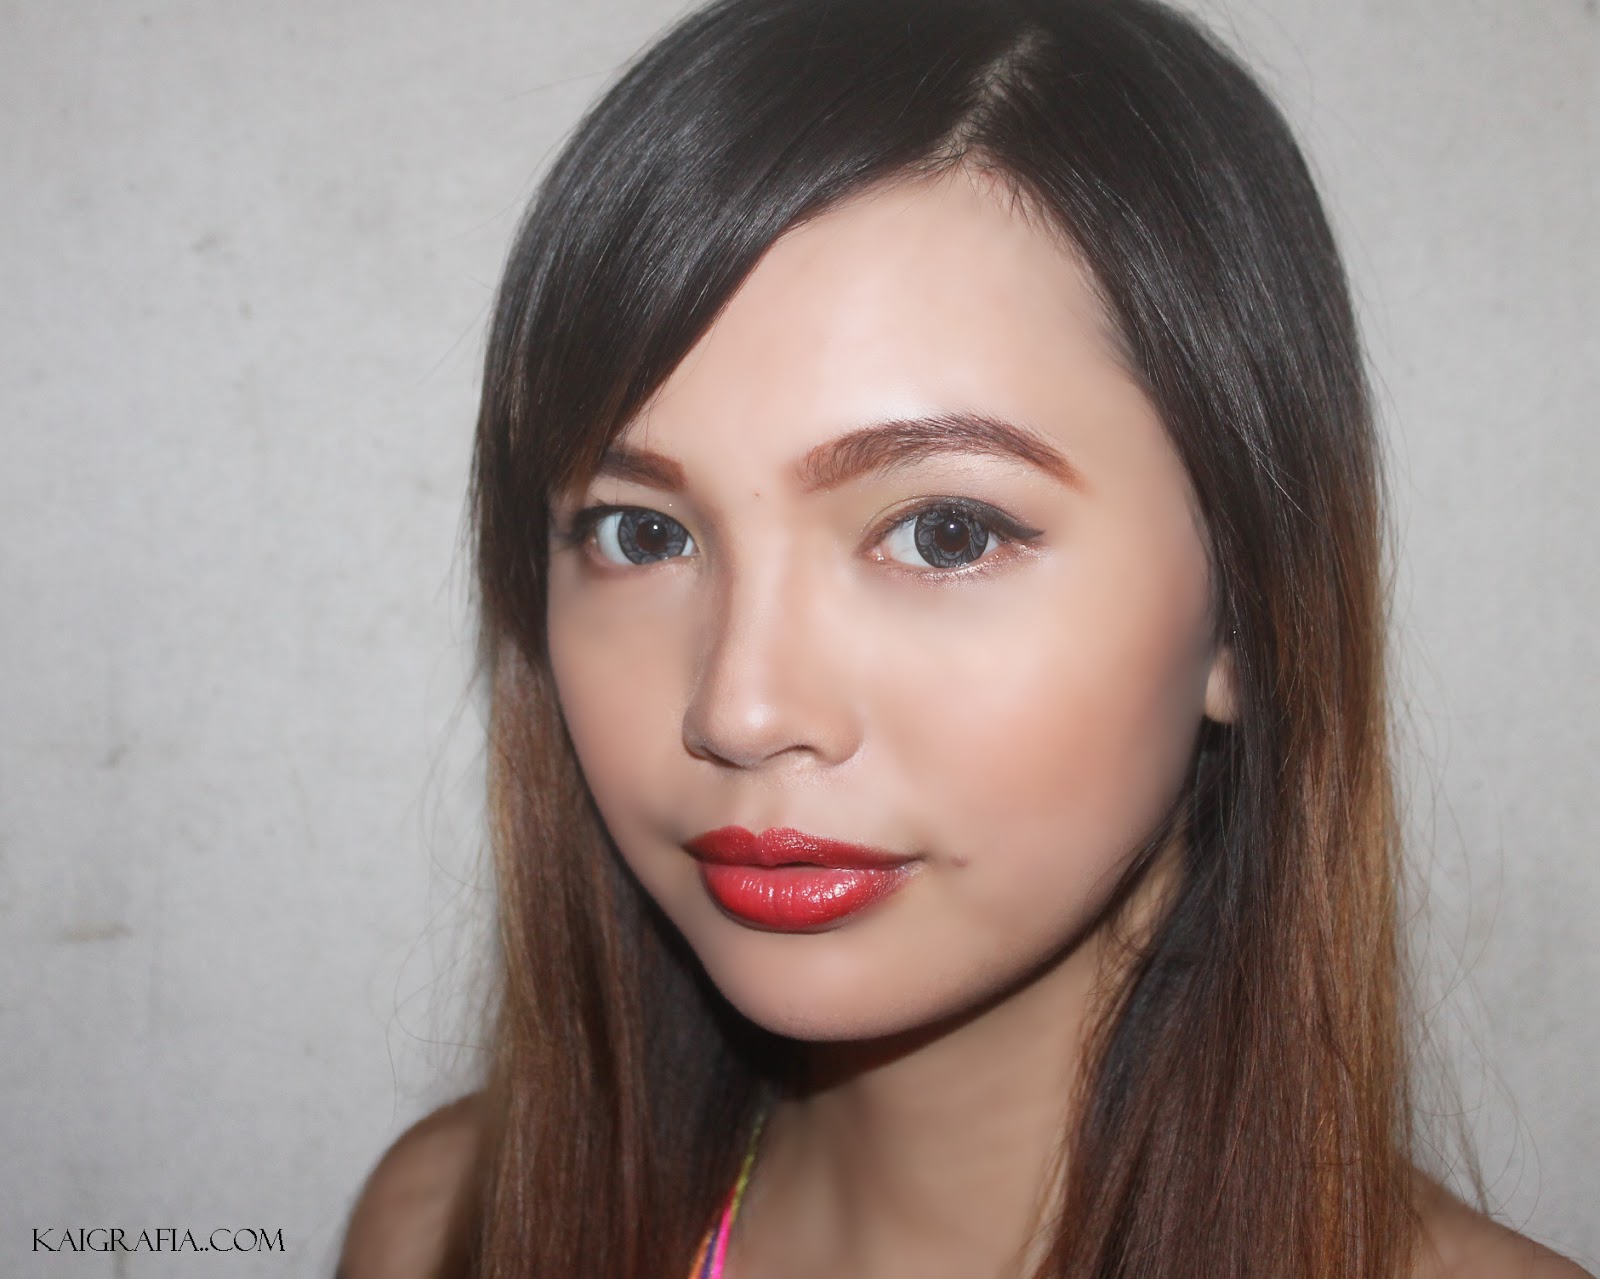 Full face photo using contact lens